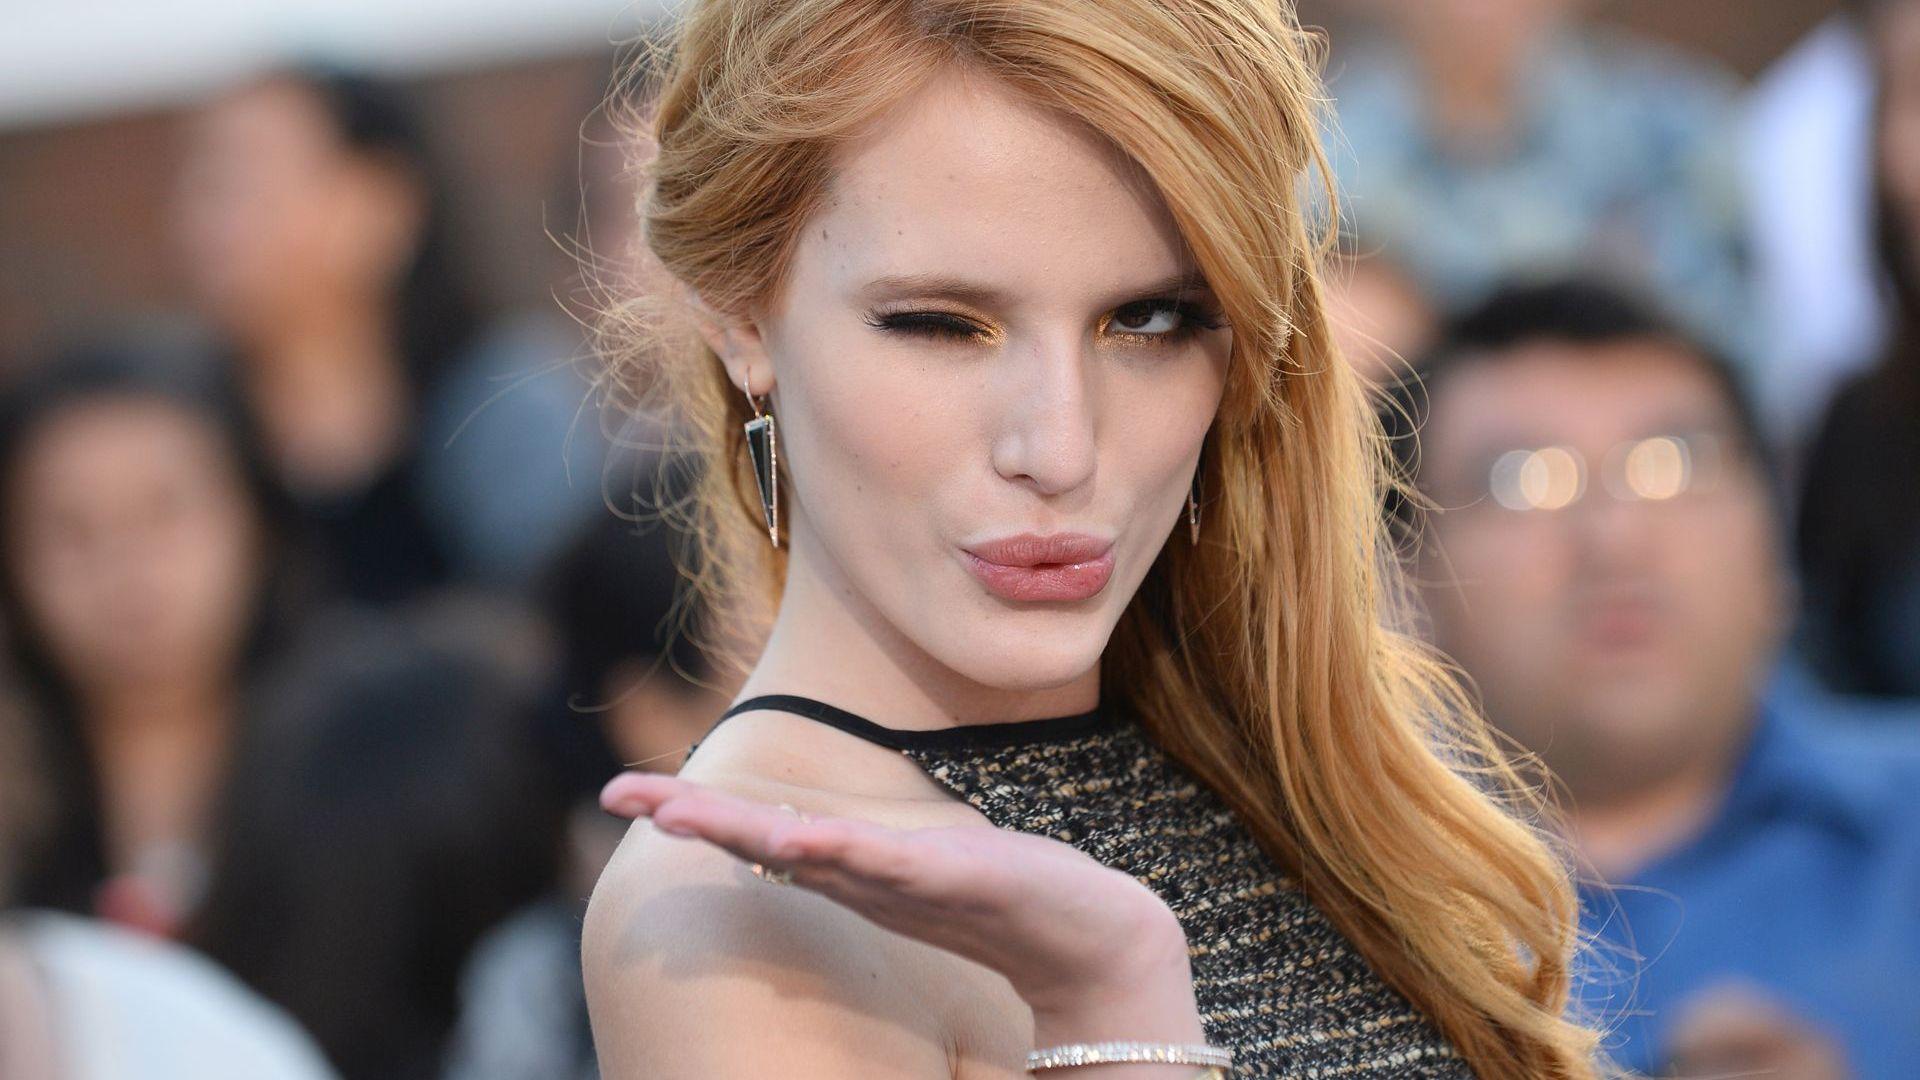 Bella Thorne Wallpaper Image Photo Picture Background